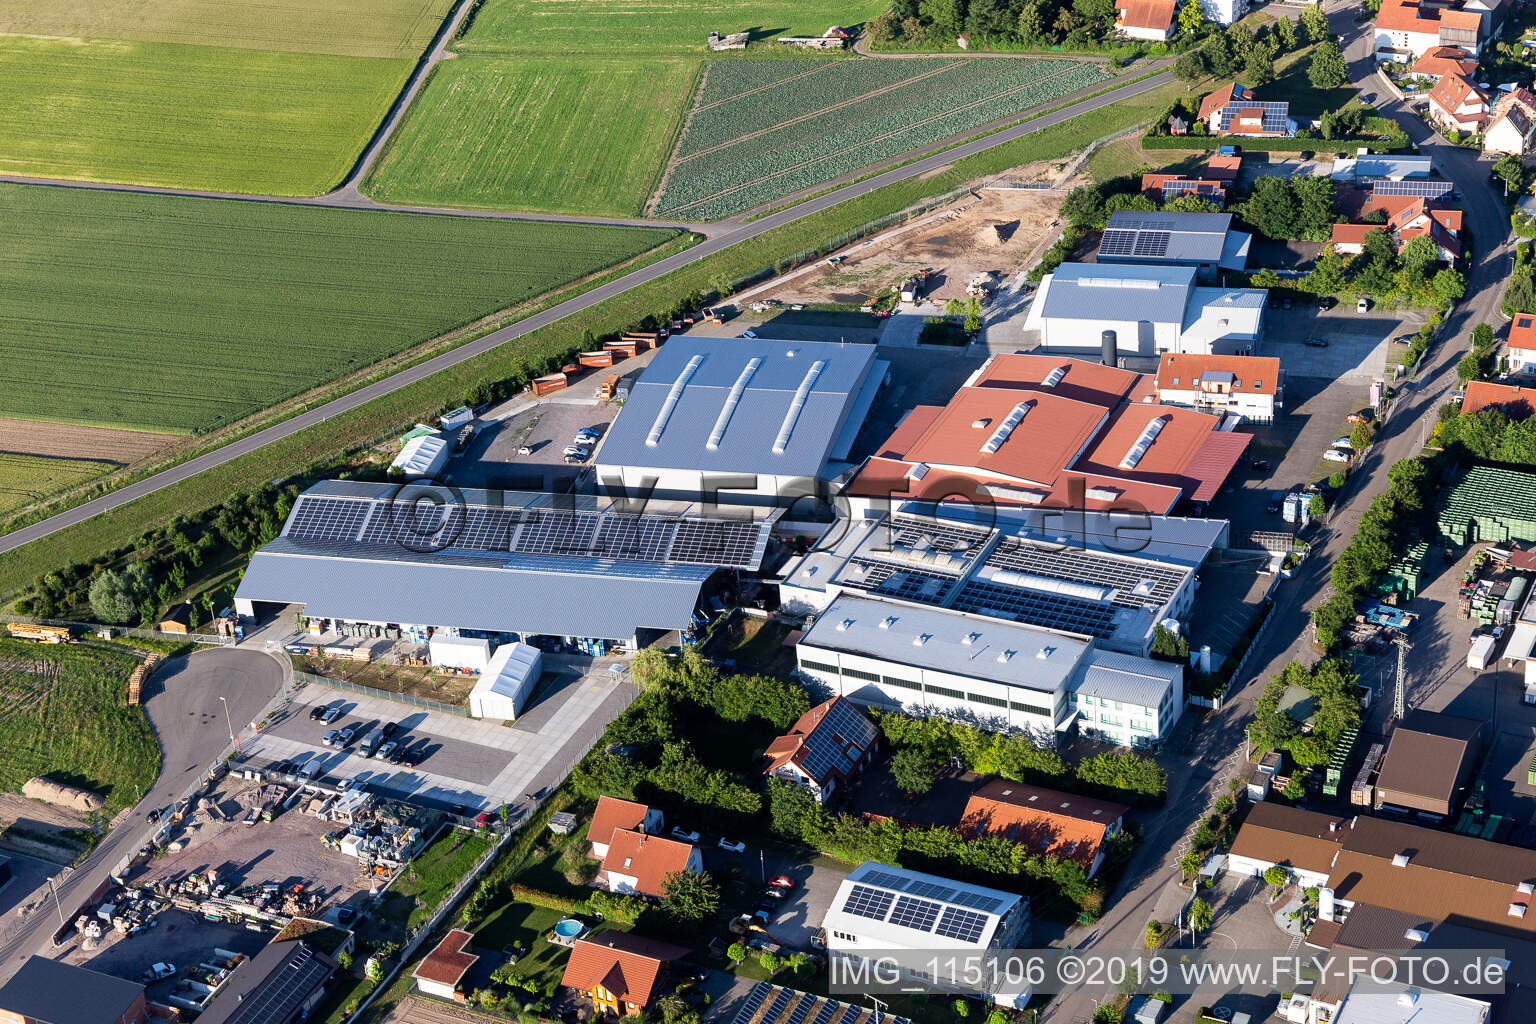 Oblique view of Commercial area Im Gereut, HGGS LaserCUT GmbH & Co. KG in Hatzenbühl in the state Rhineland-Palatinate, Germany